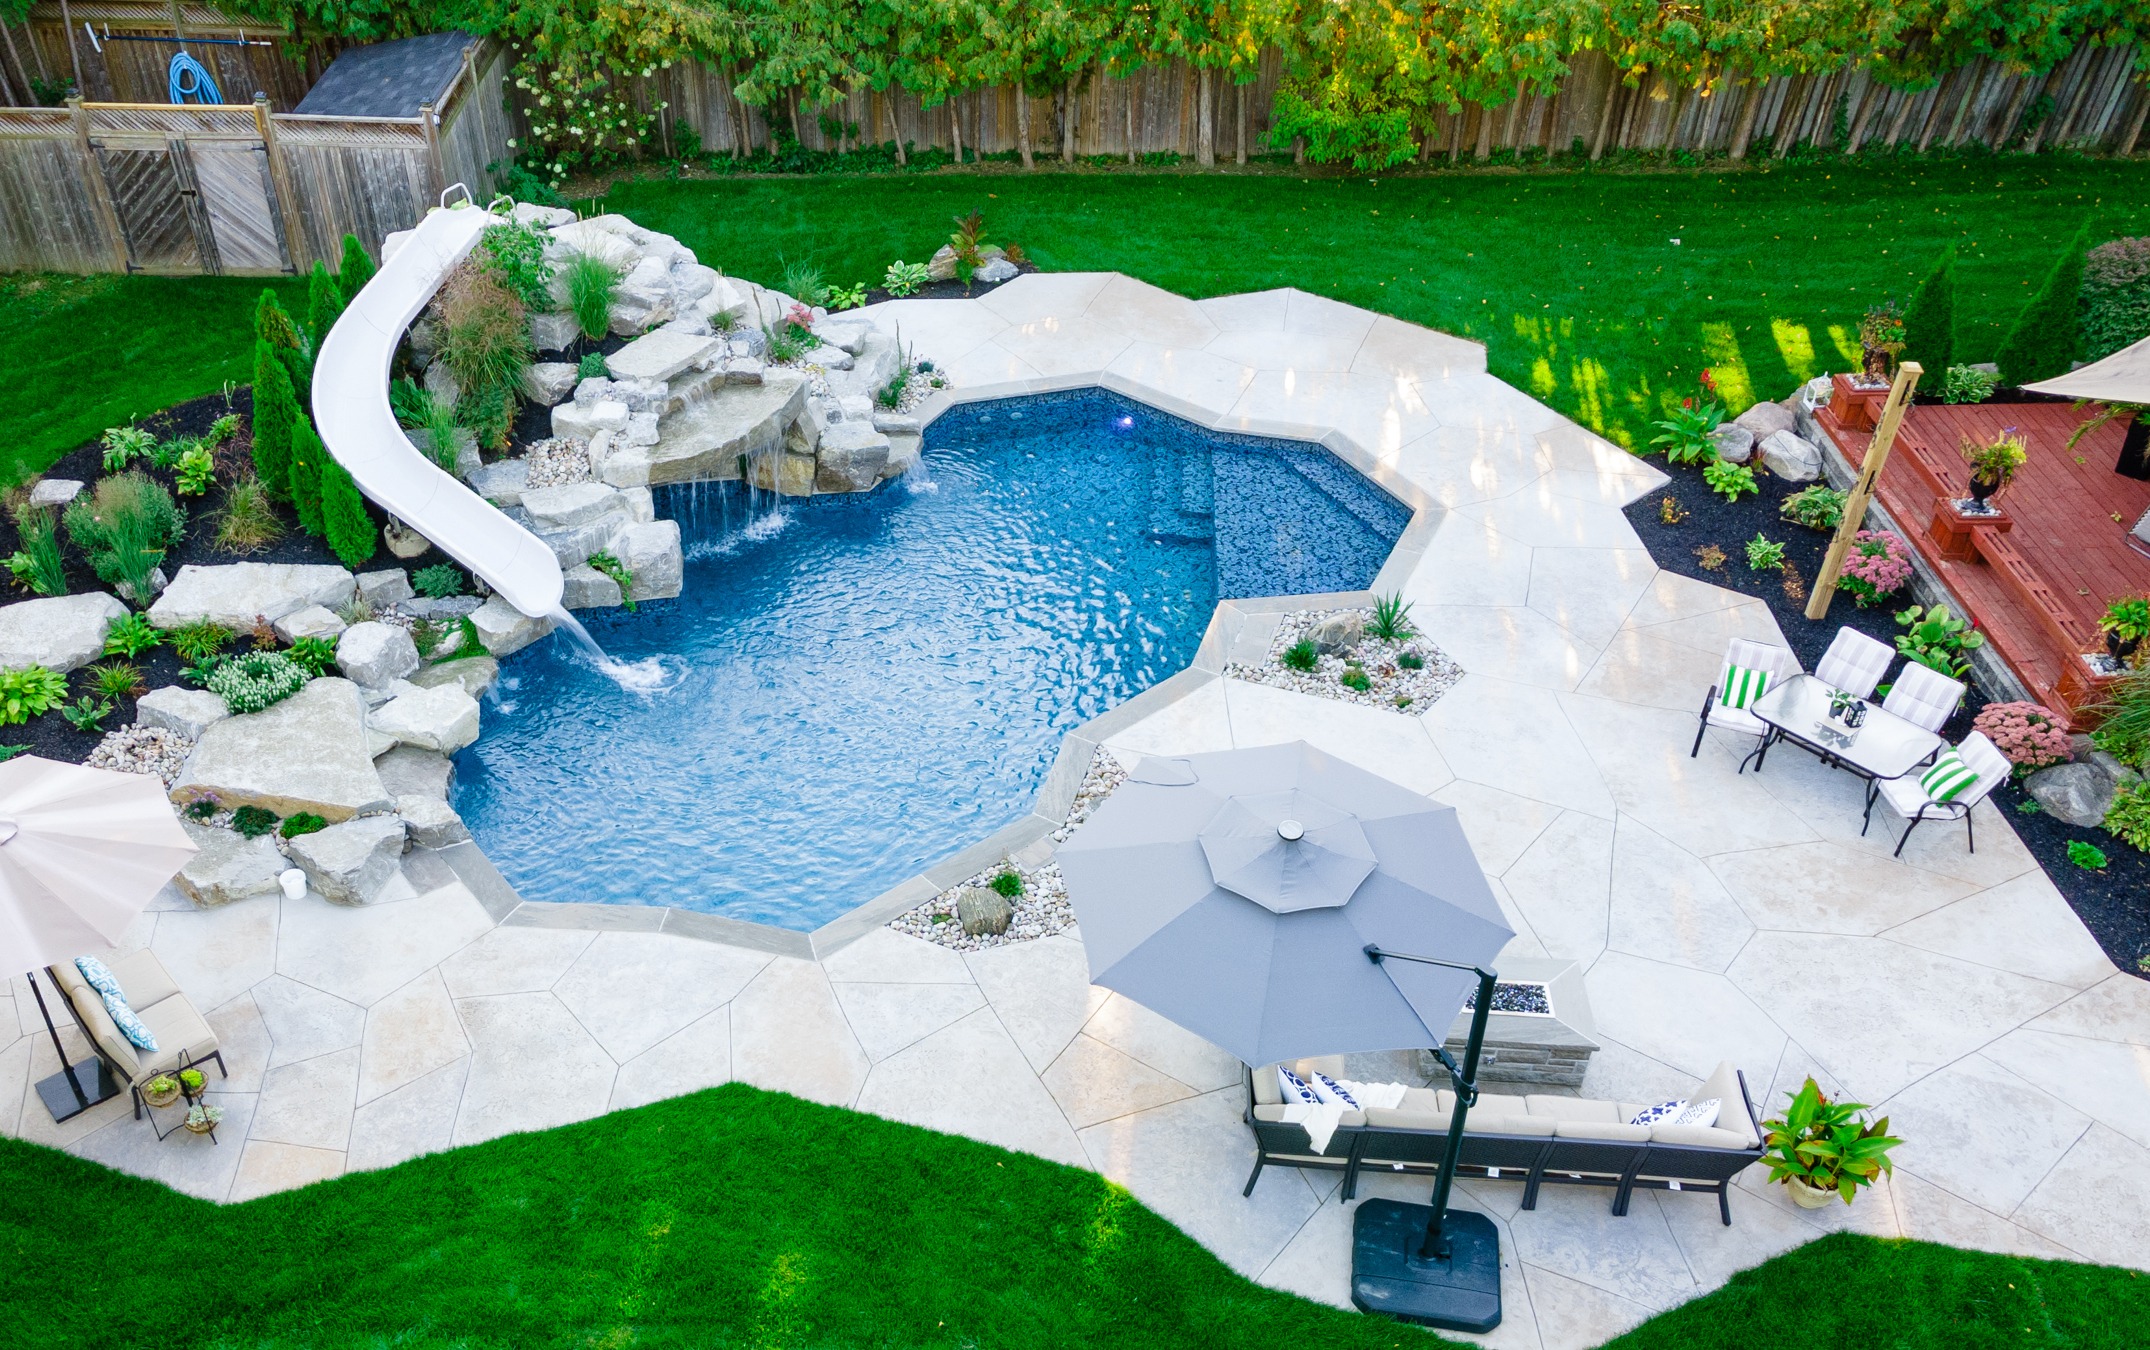 Aerial view of a landscaped backyard with a blue swimming pool, white waterslide, surrounding stone features, patio area, green lawn, and wooden deck.